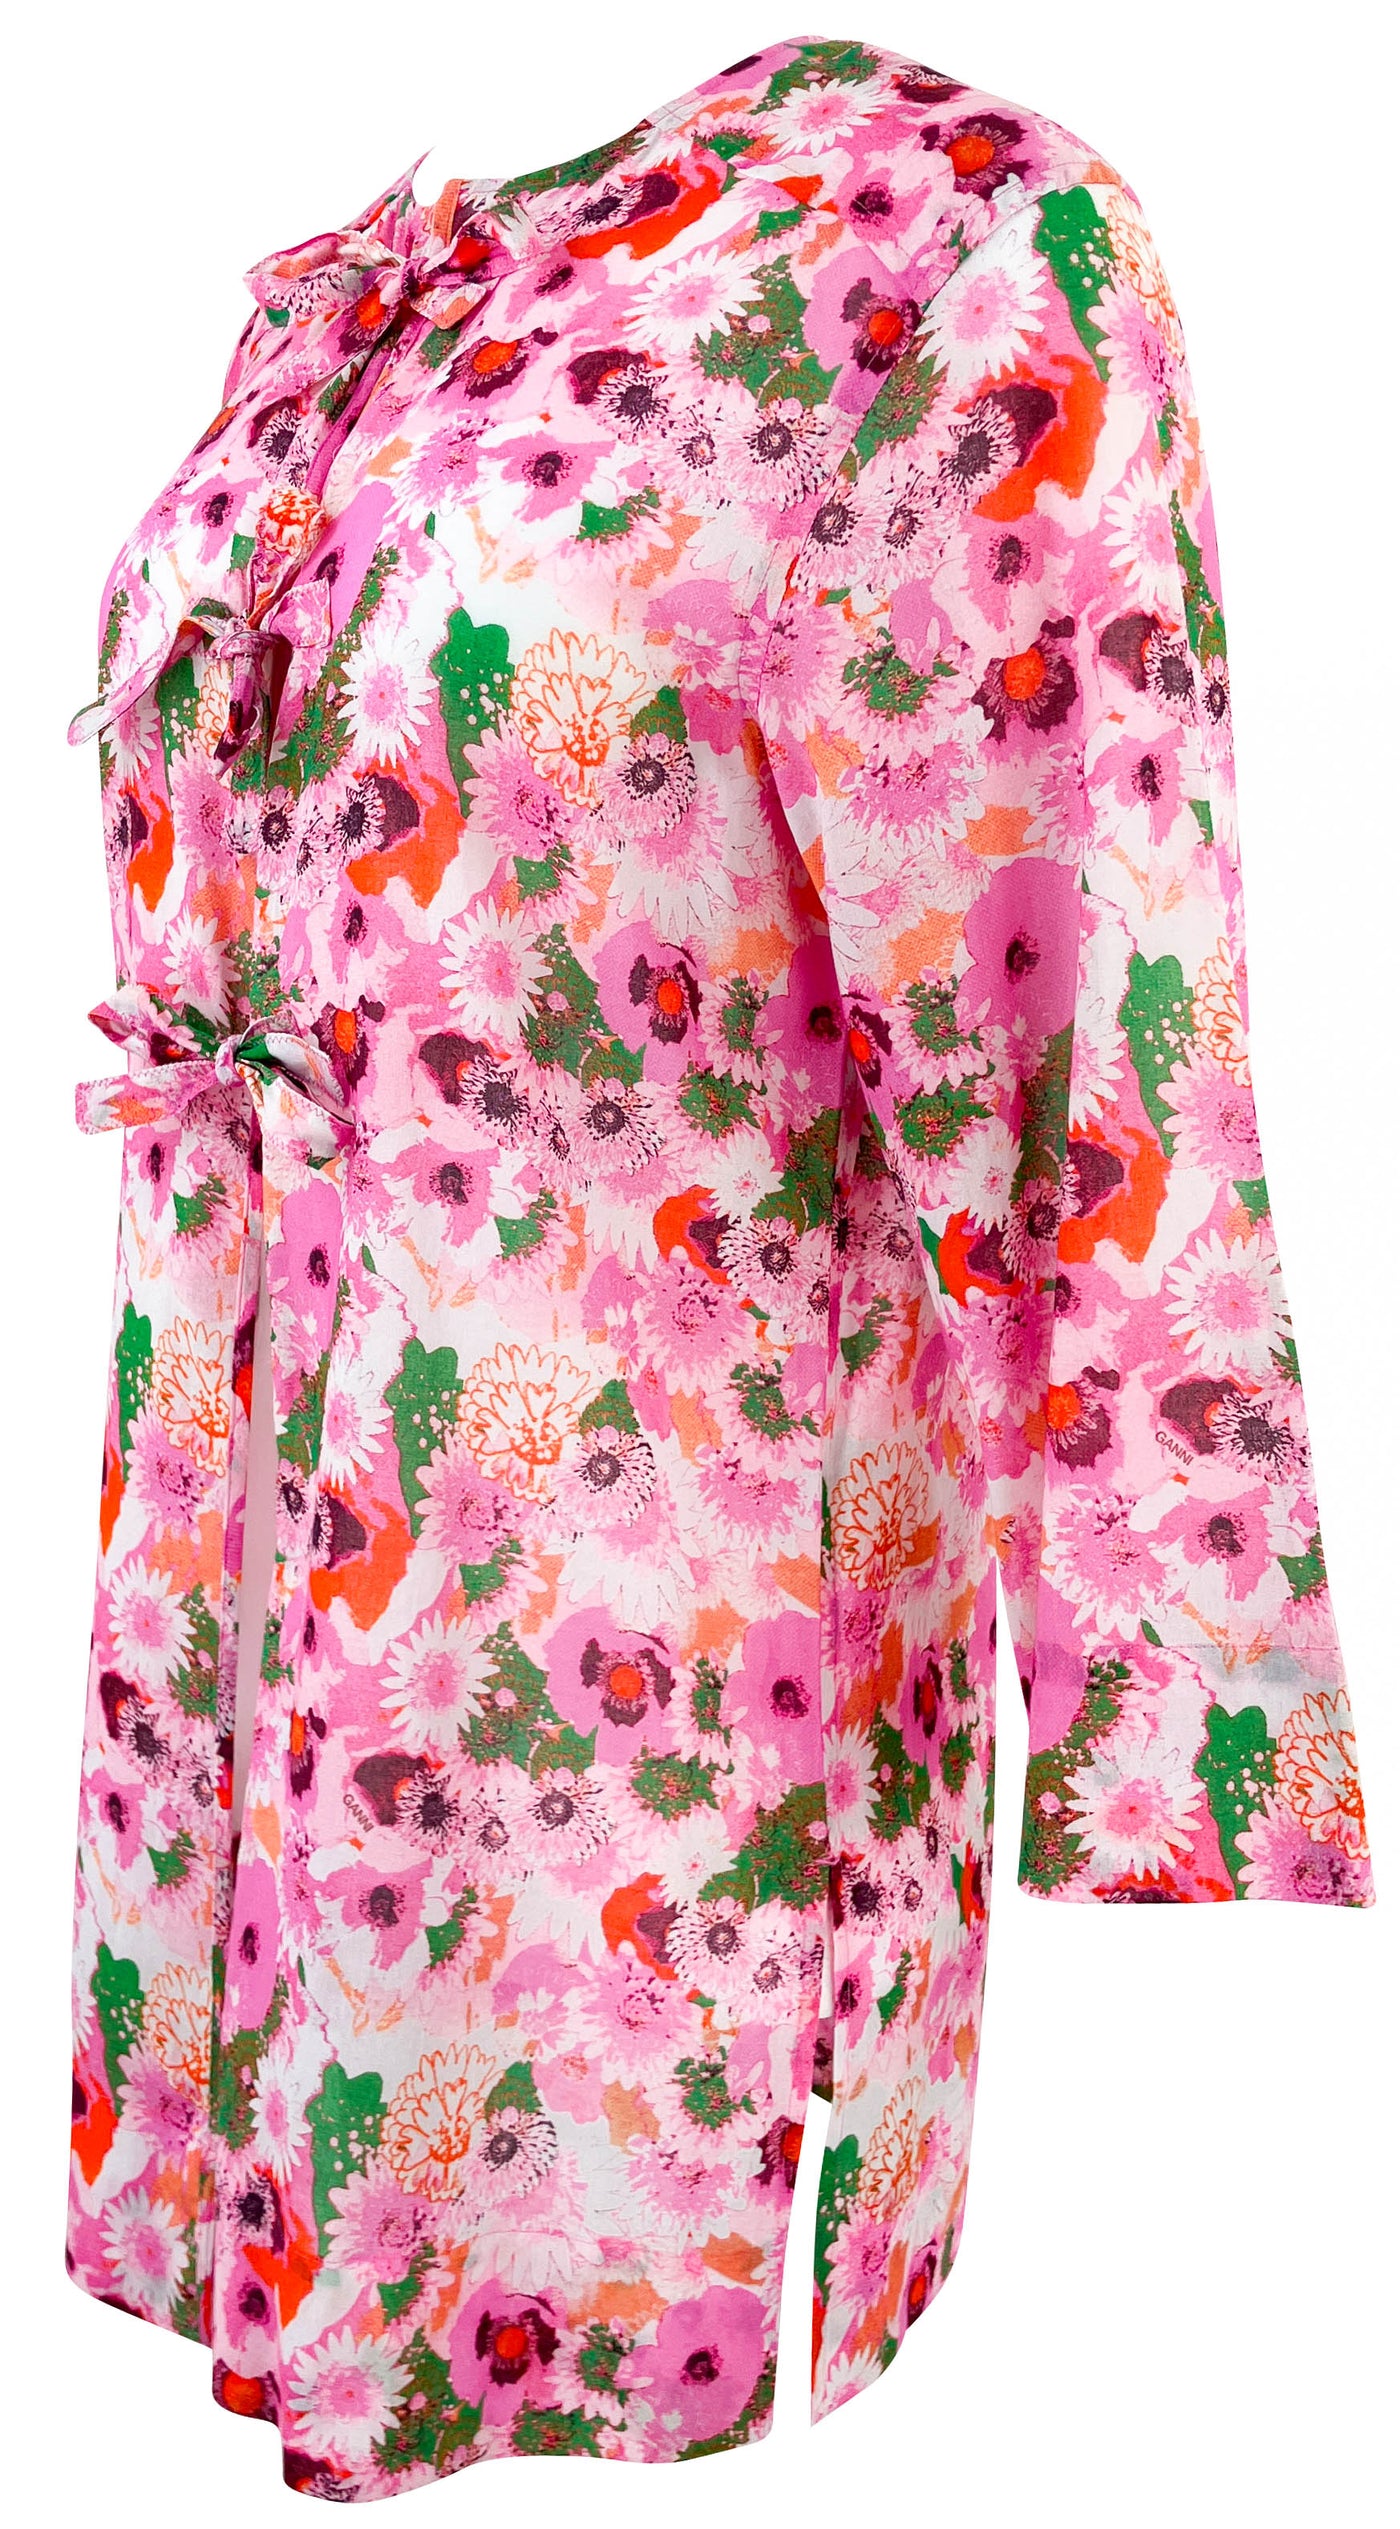 Ganni Open Front Blouse in Pink Floral - Discounts on Ganni at UAL